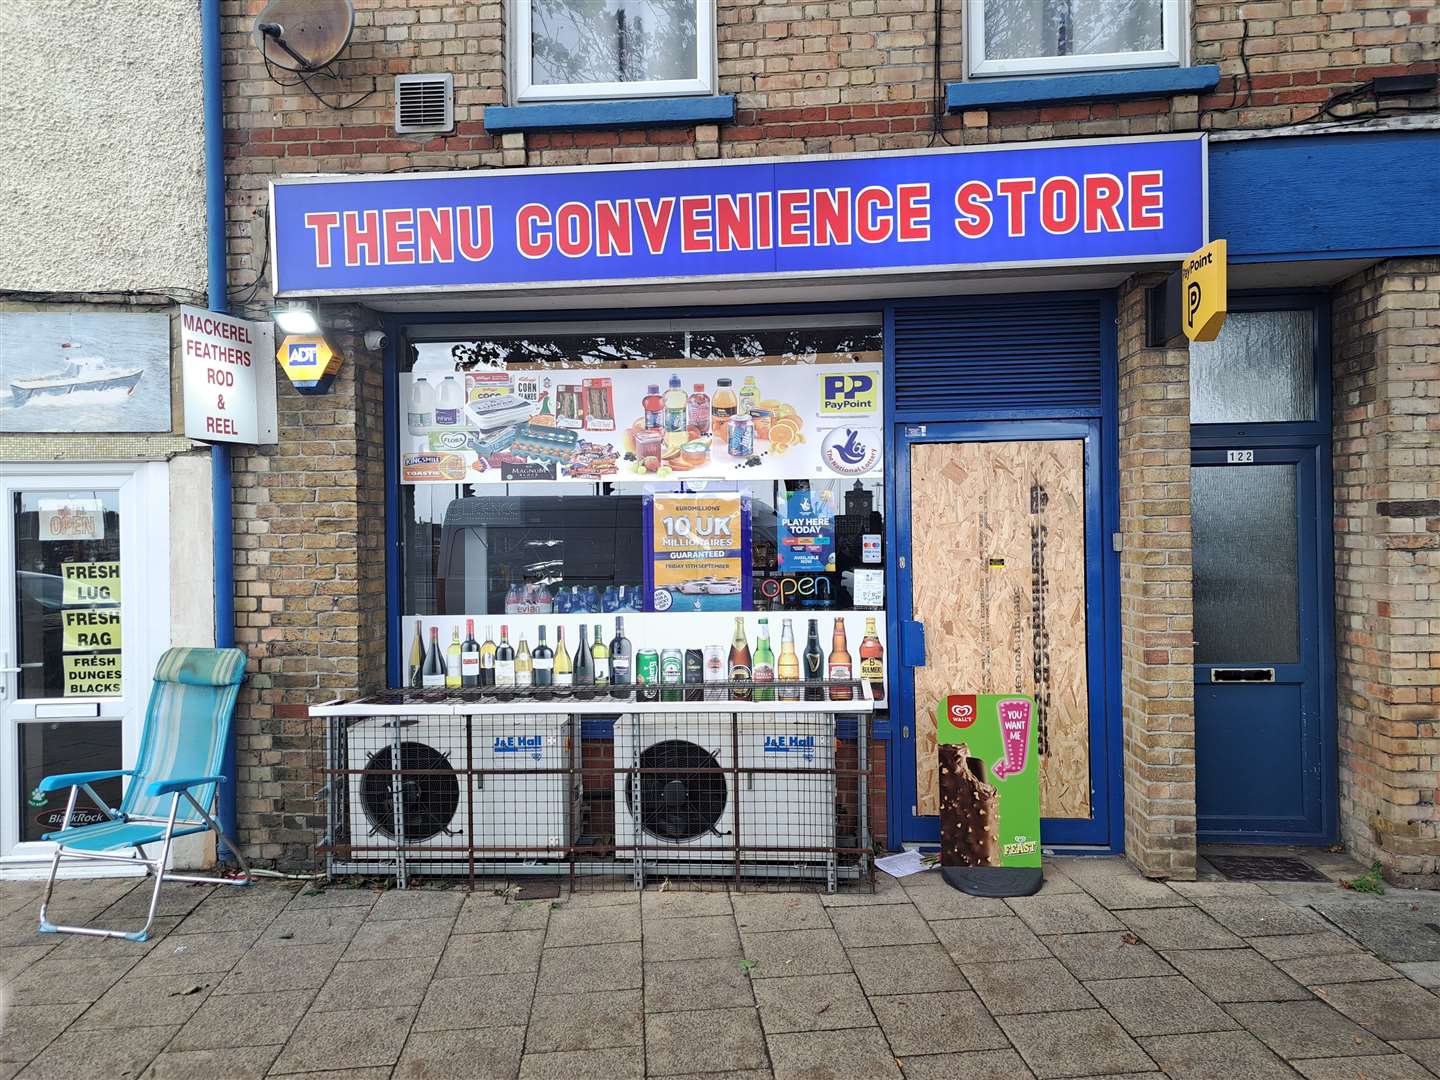 The door to Thenu Convenience Store in Snargate Street, Dover, was boarded up following the incident